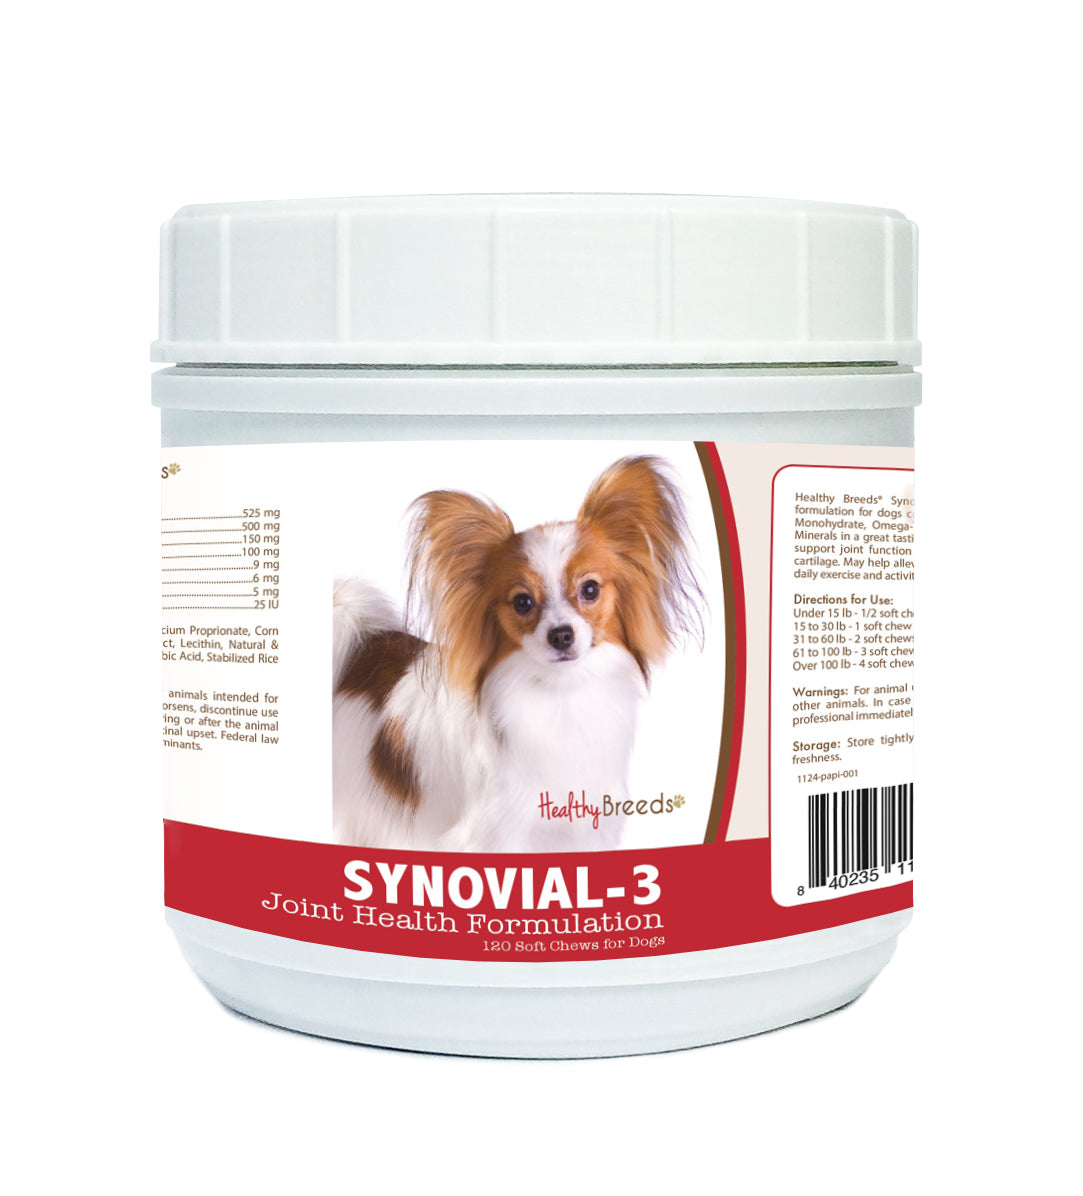 Papillon Synovial-3 Joint Health Formulation Soft Chews 120 Count